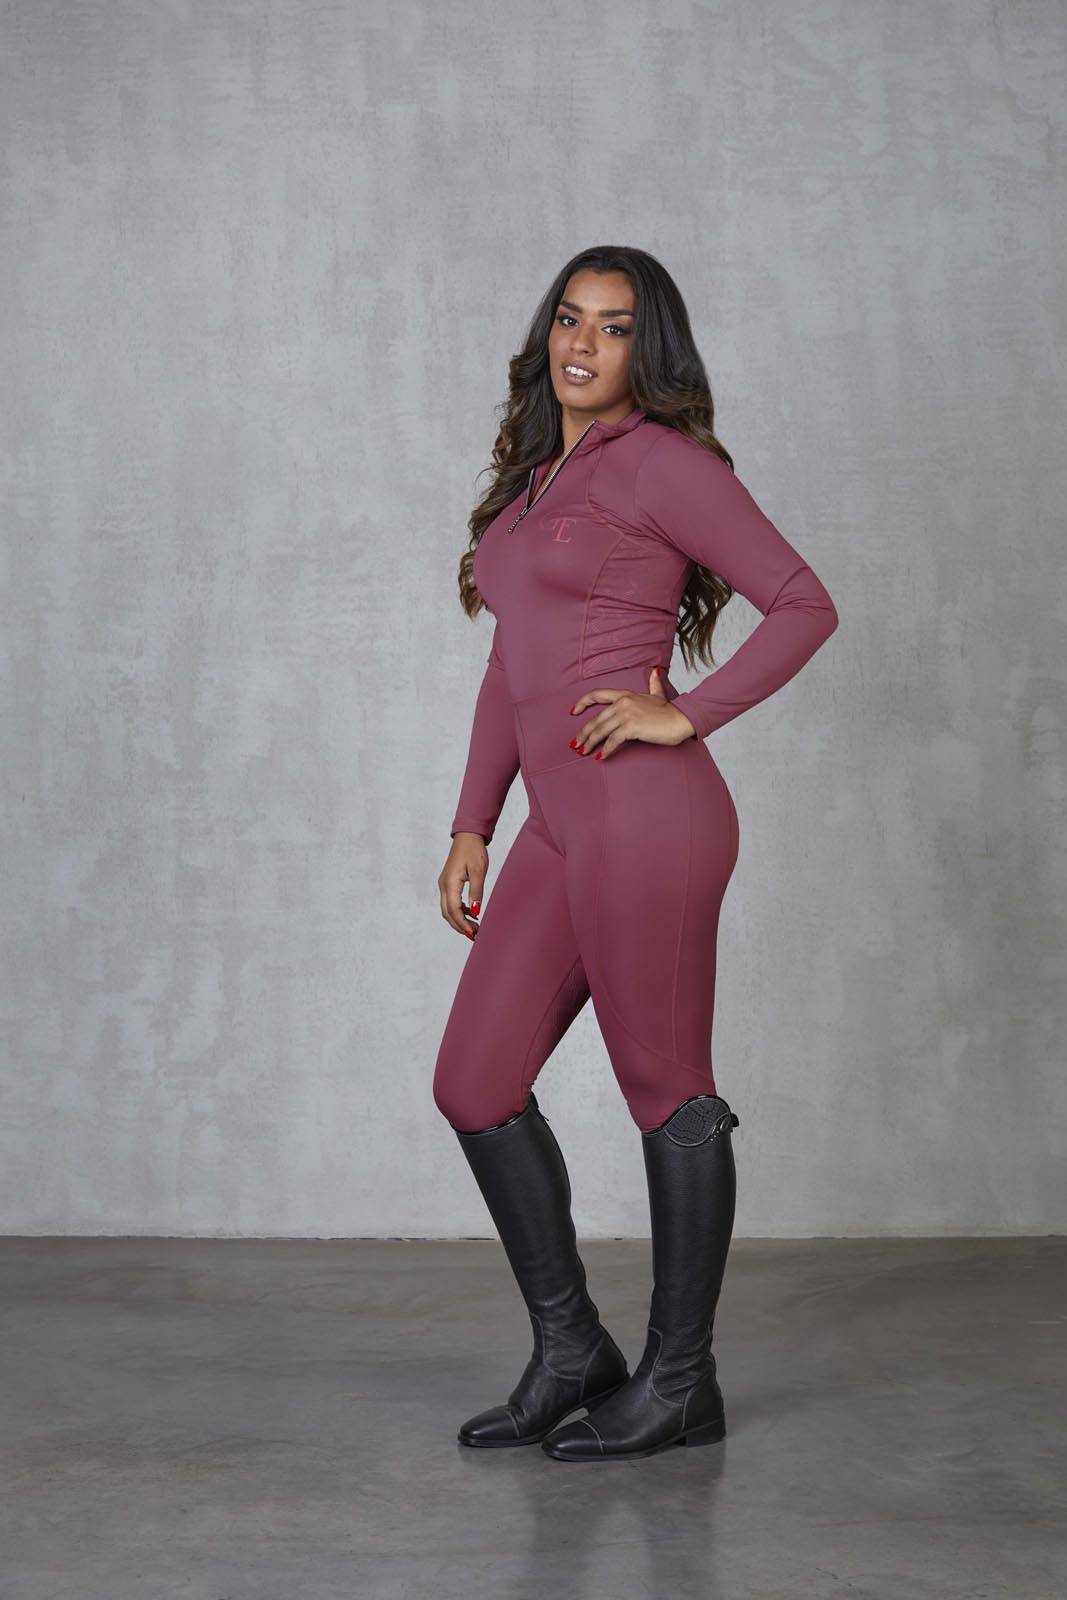 A brunette model wearing our fleece-lined berry leggings with matching long-sleeved 1/4 zip base layer.